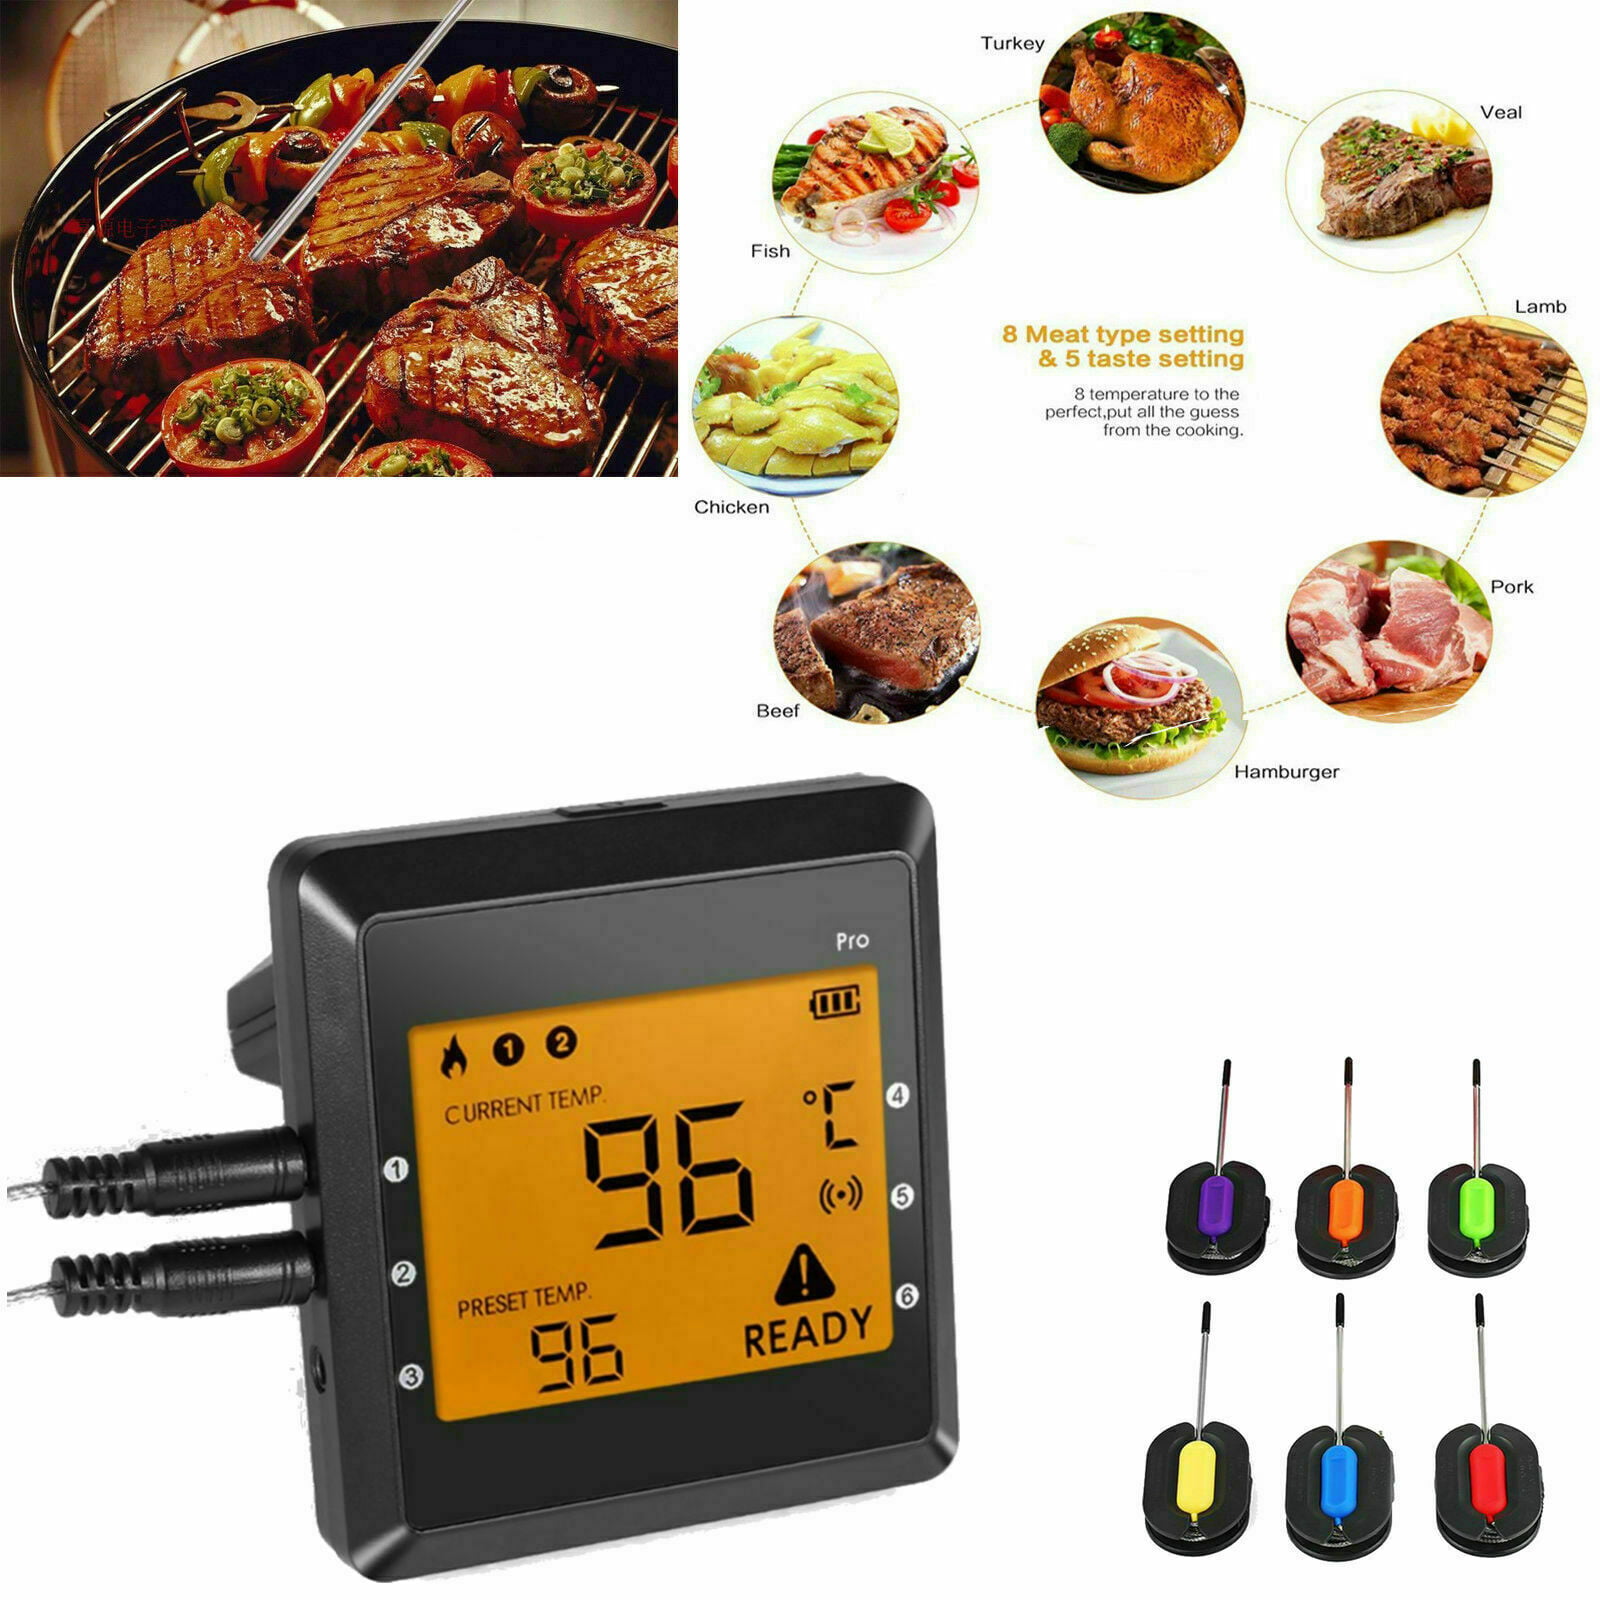 Alarm Monitor Cooking Thermometer for Barbecue Oven Kitchen Wireless Meat Thermometer for Grilling Support iOS & Android Bluetooth Meat Thermometer Digital BBQ Cooking Thermometer with 6 Probes